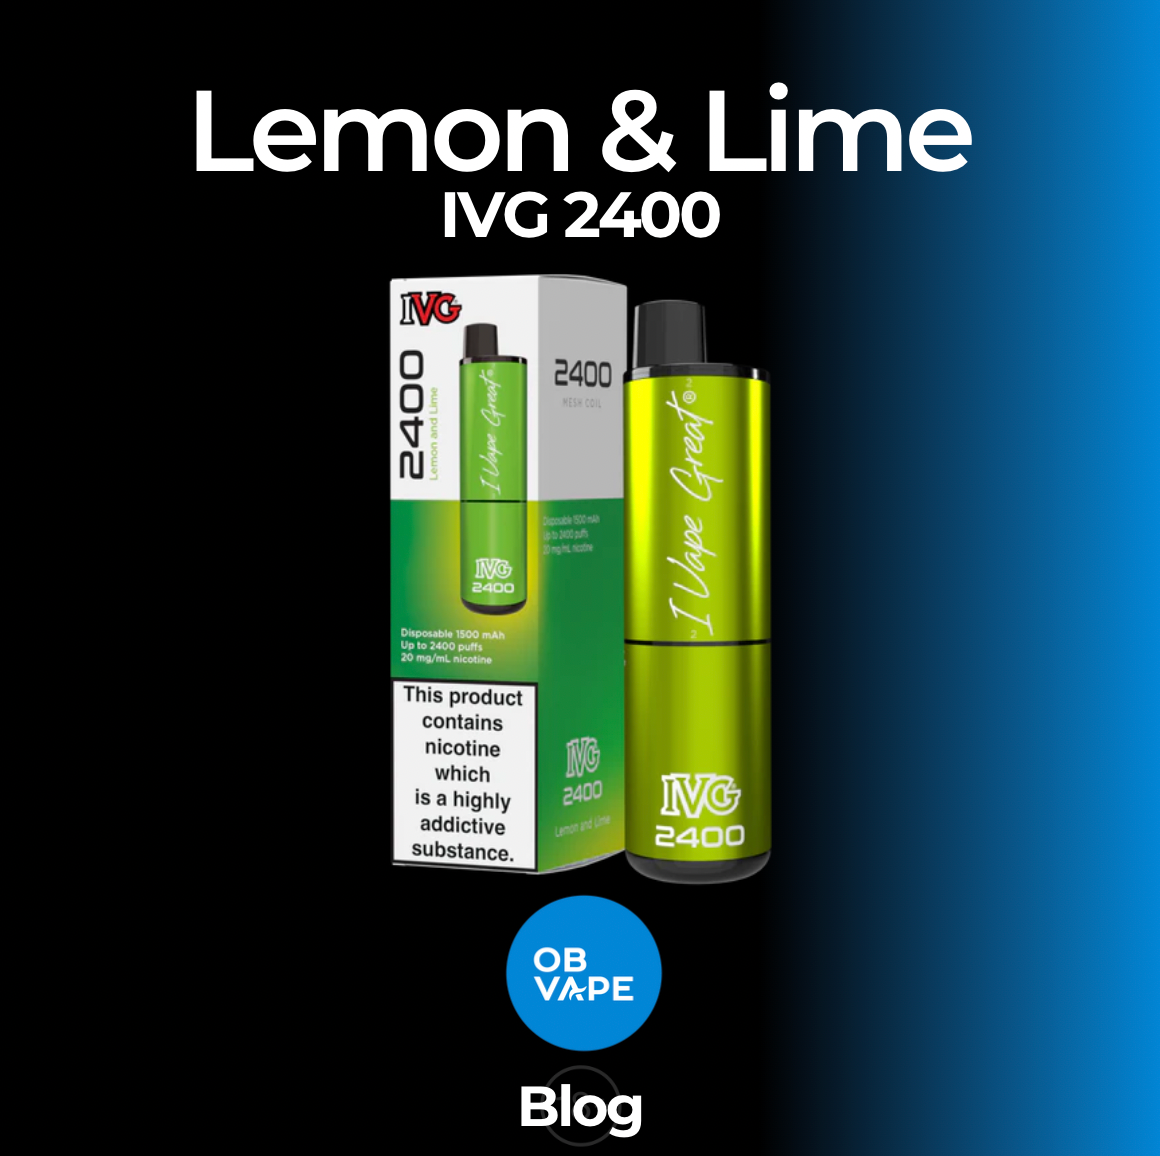 Lemon & Lime IVG 2400 Disposable - Is It Nice?